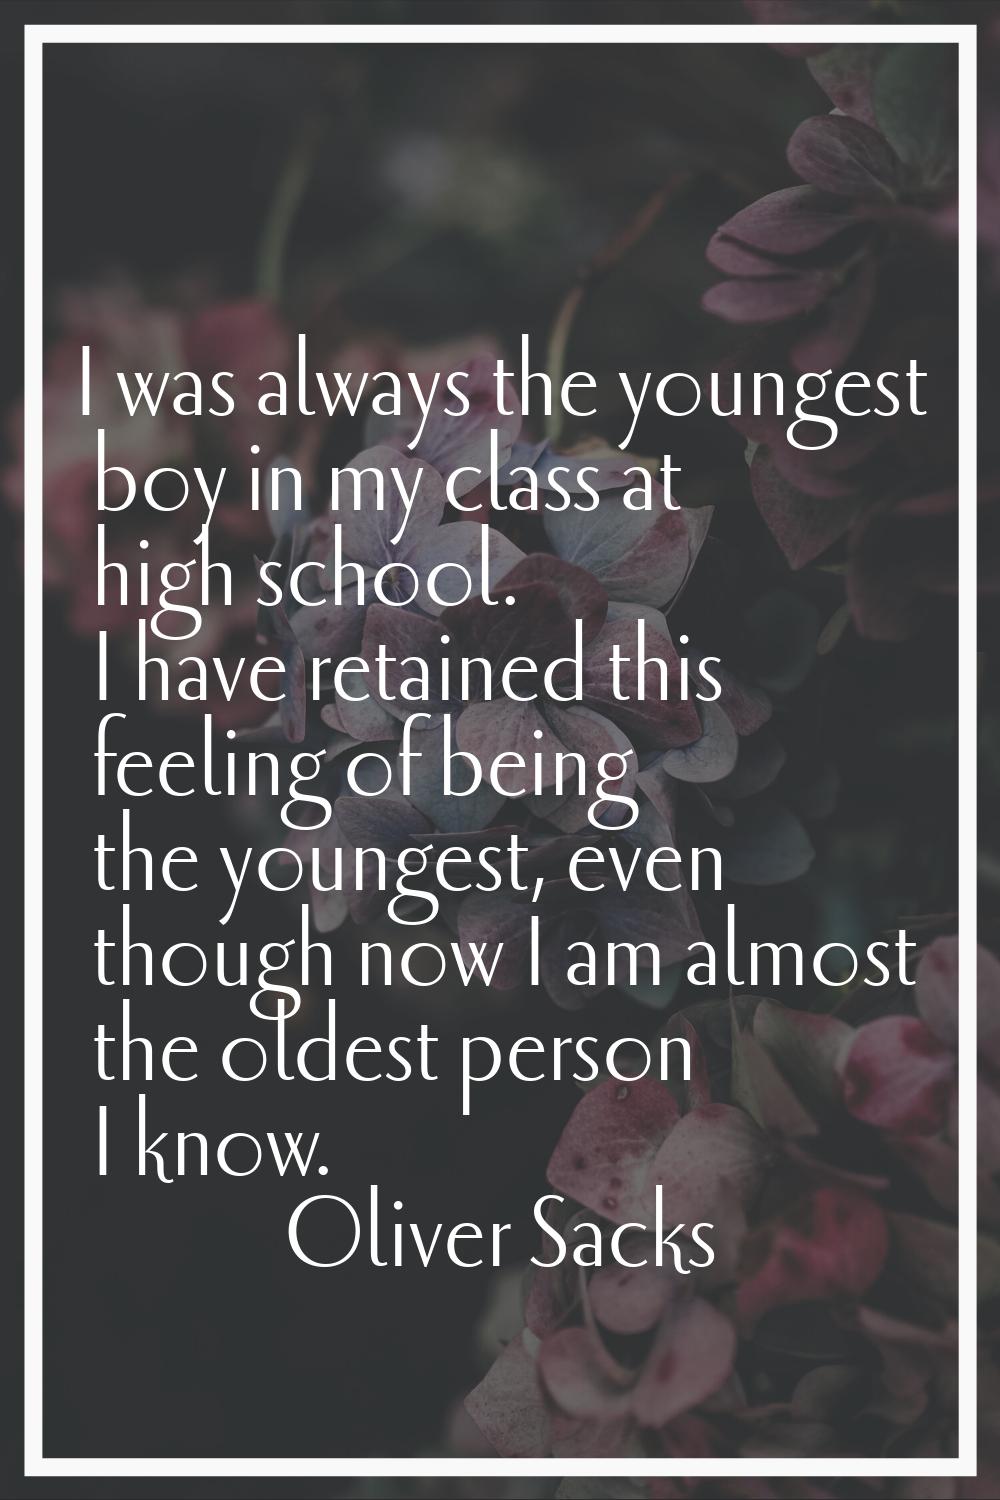 I was always the youngest boy in my class at high school. I have retained this feeling of being the